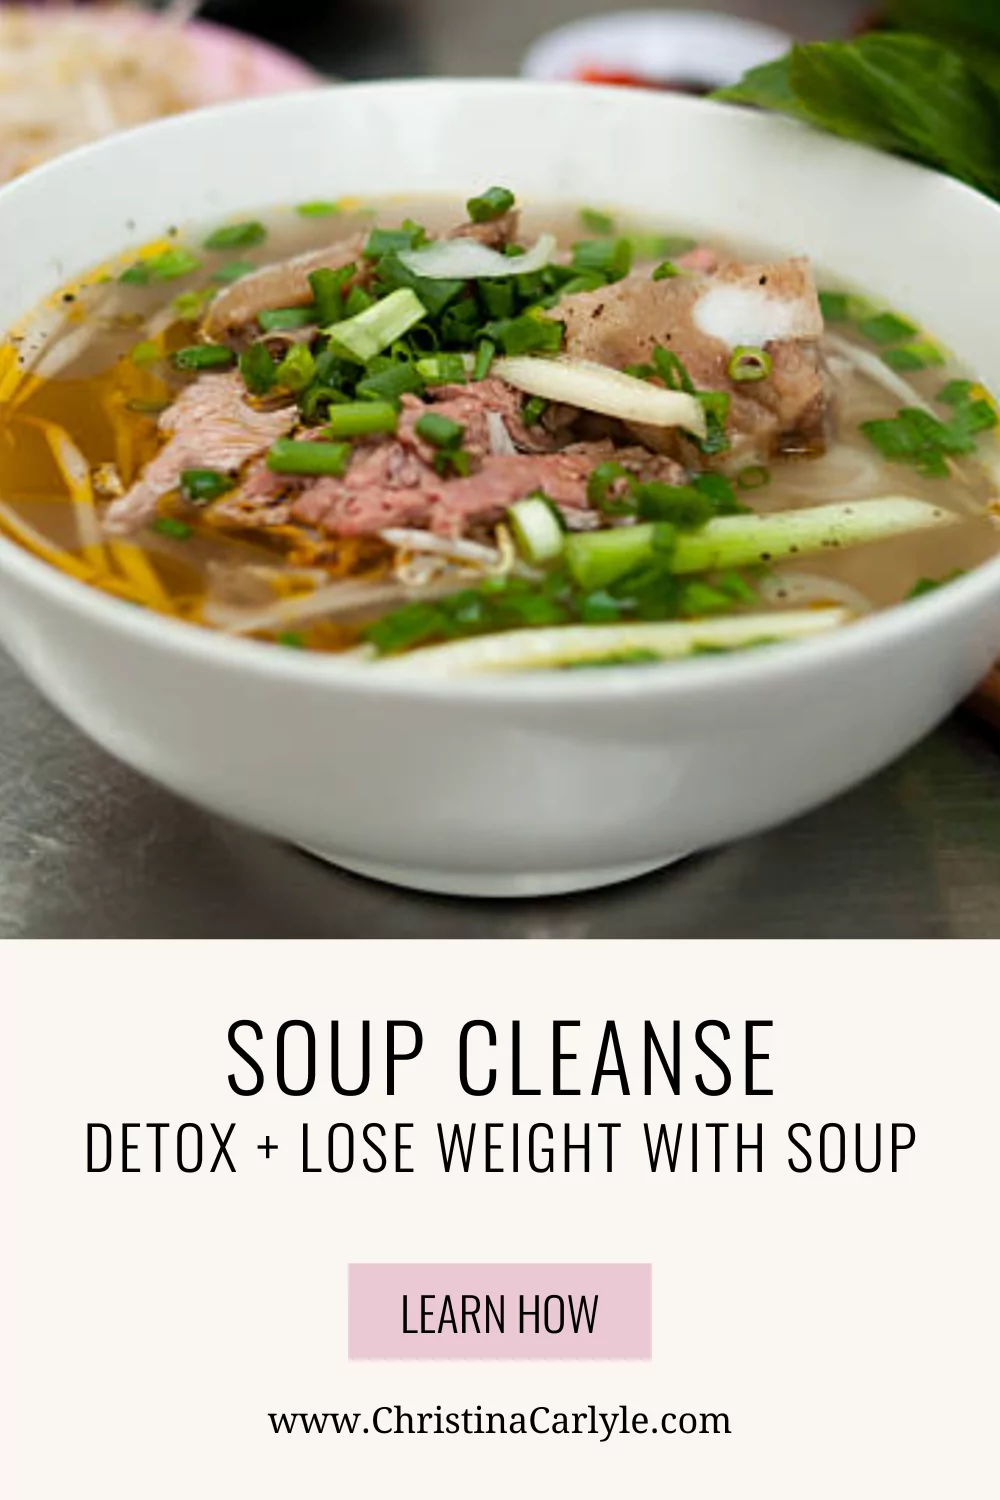 pho soup and text that says Soup Cleanse - Detox + Lose Weight with Soup